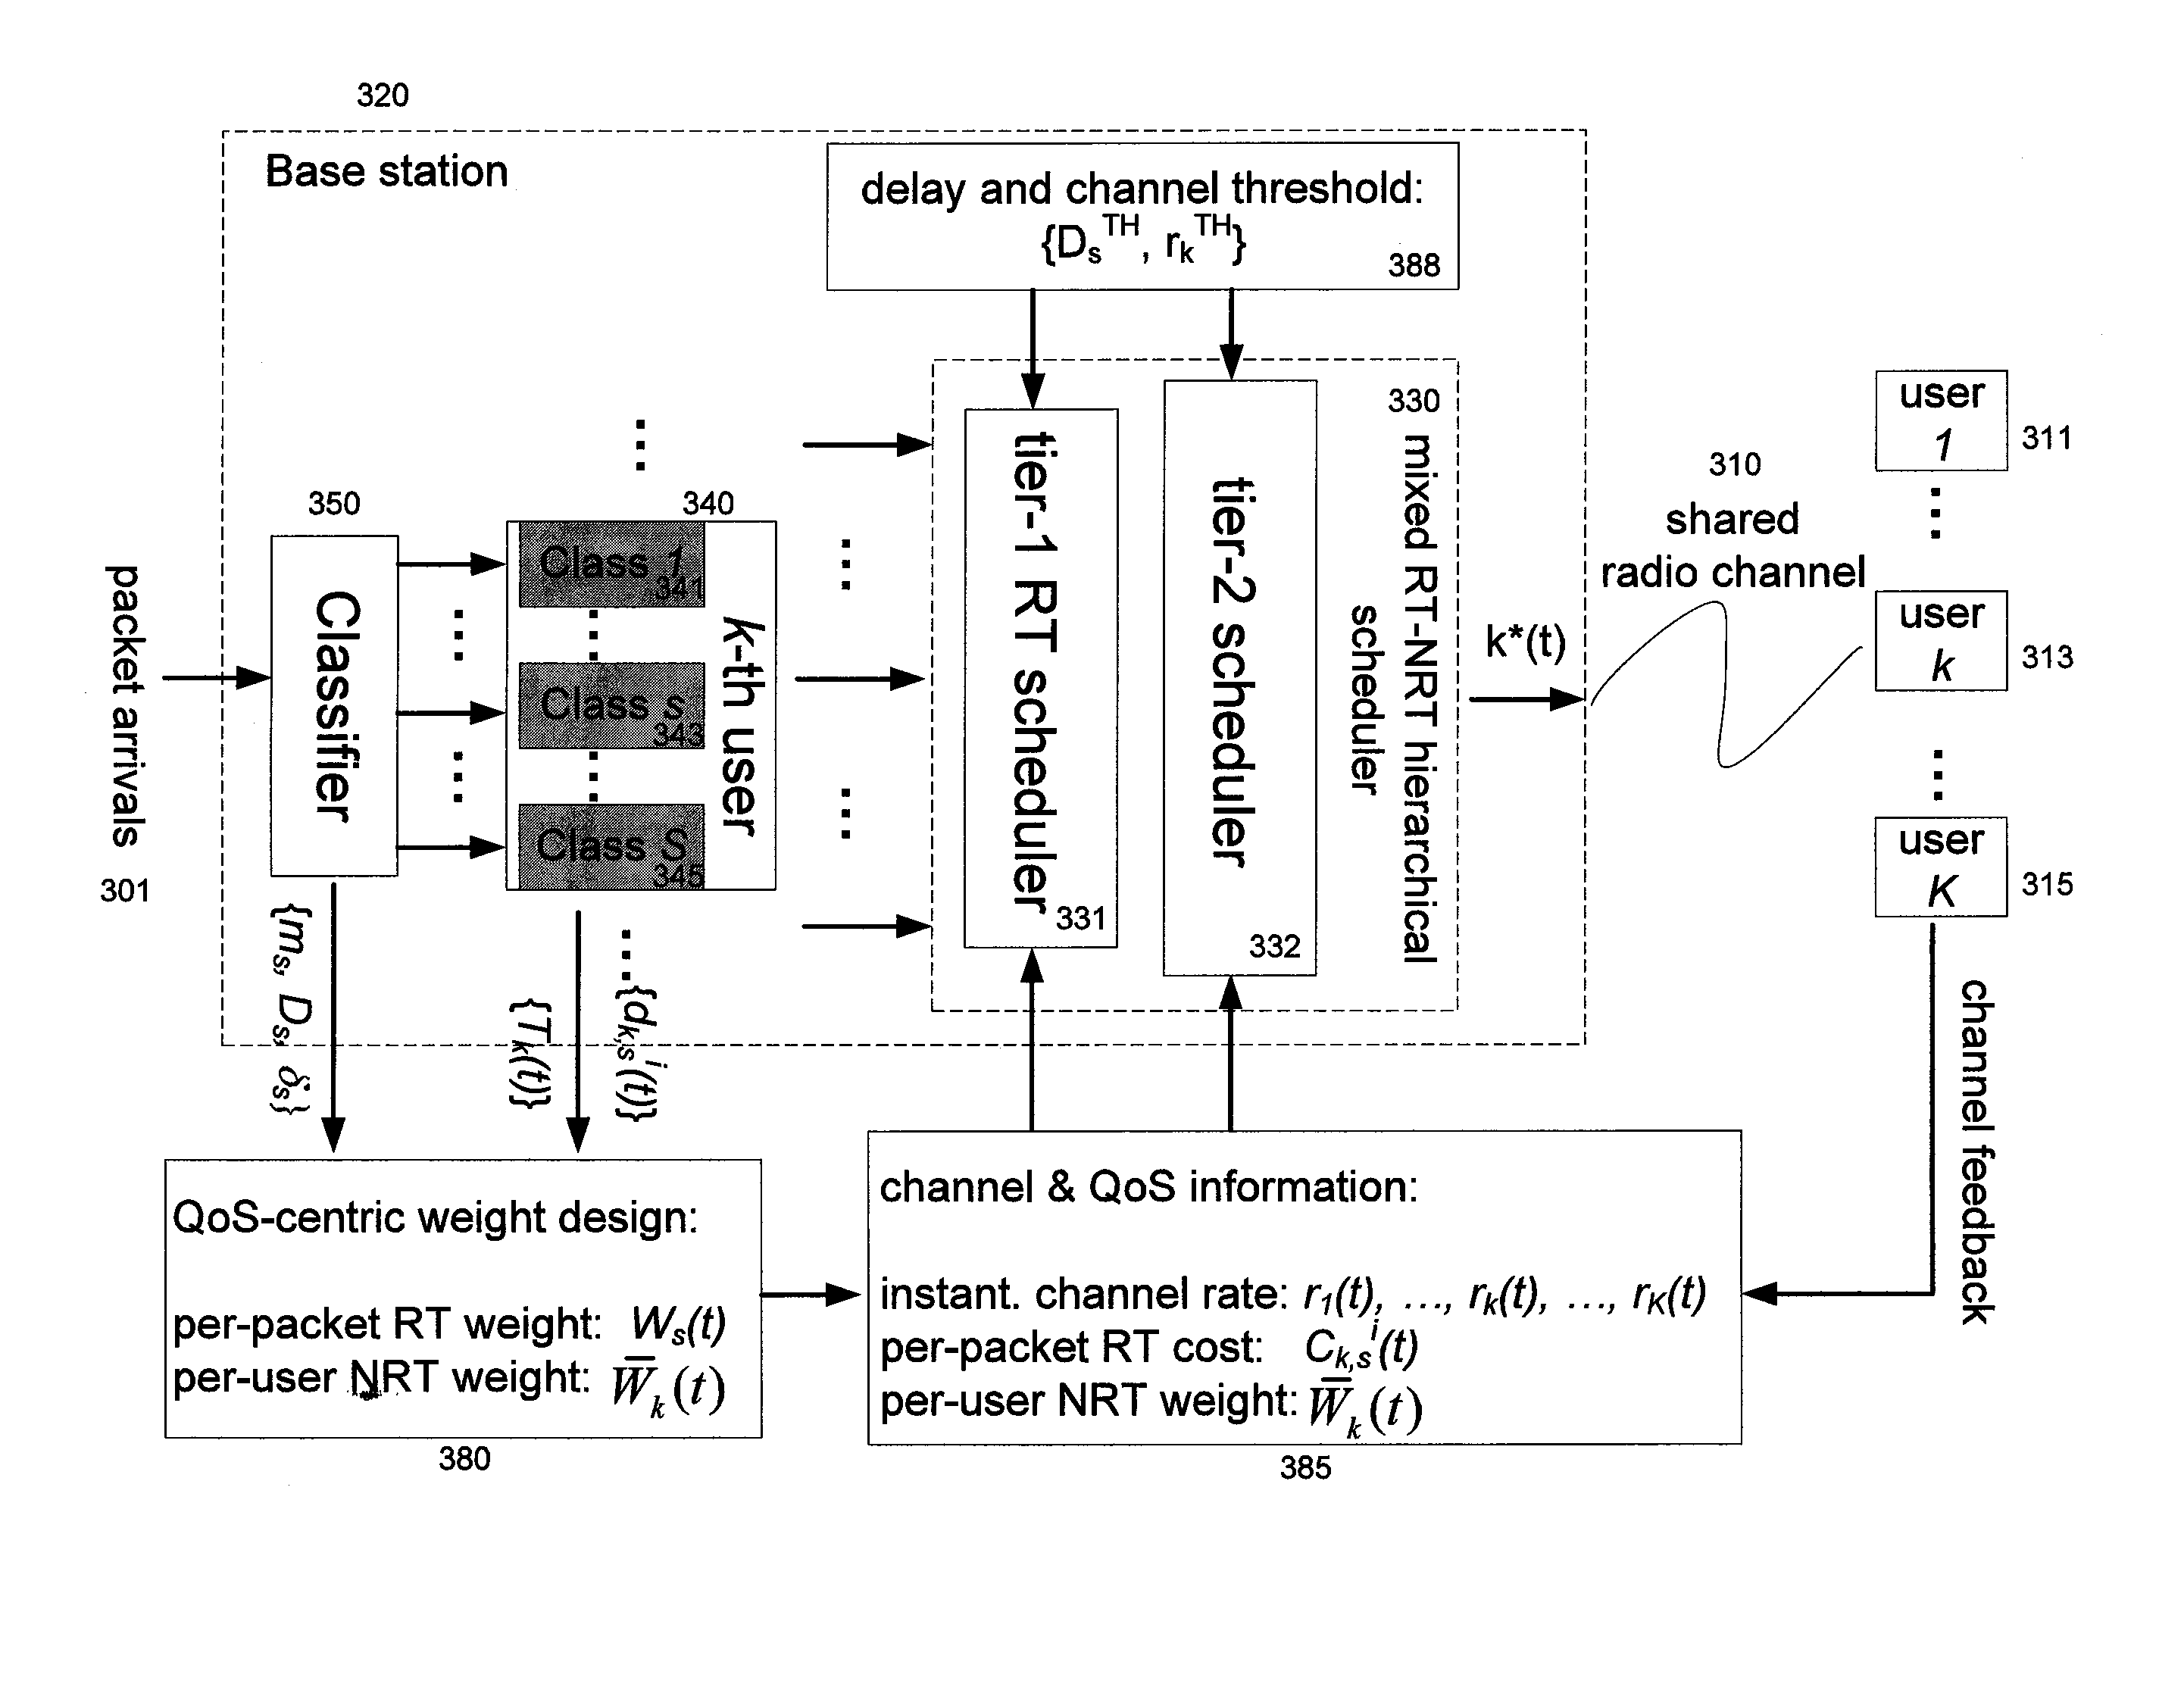 Generic Real Time Scheduler for Wireless Packet Data Systems